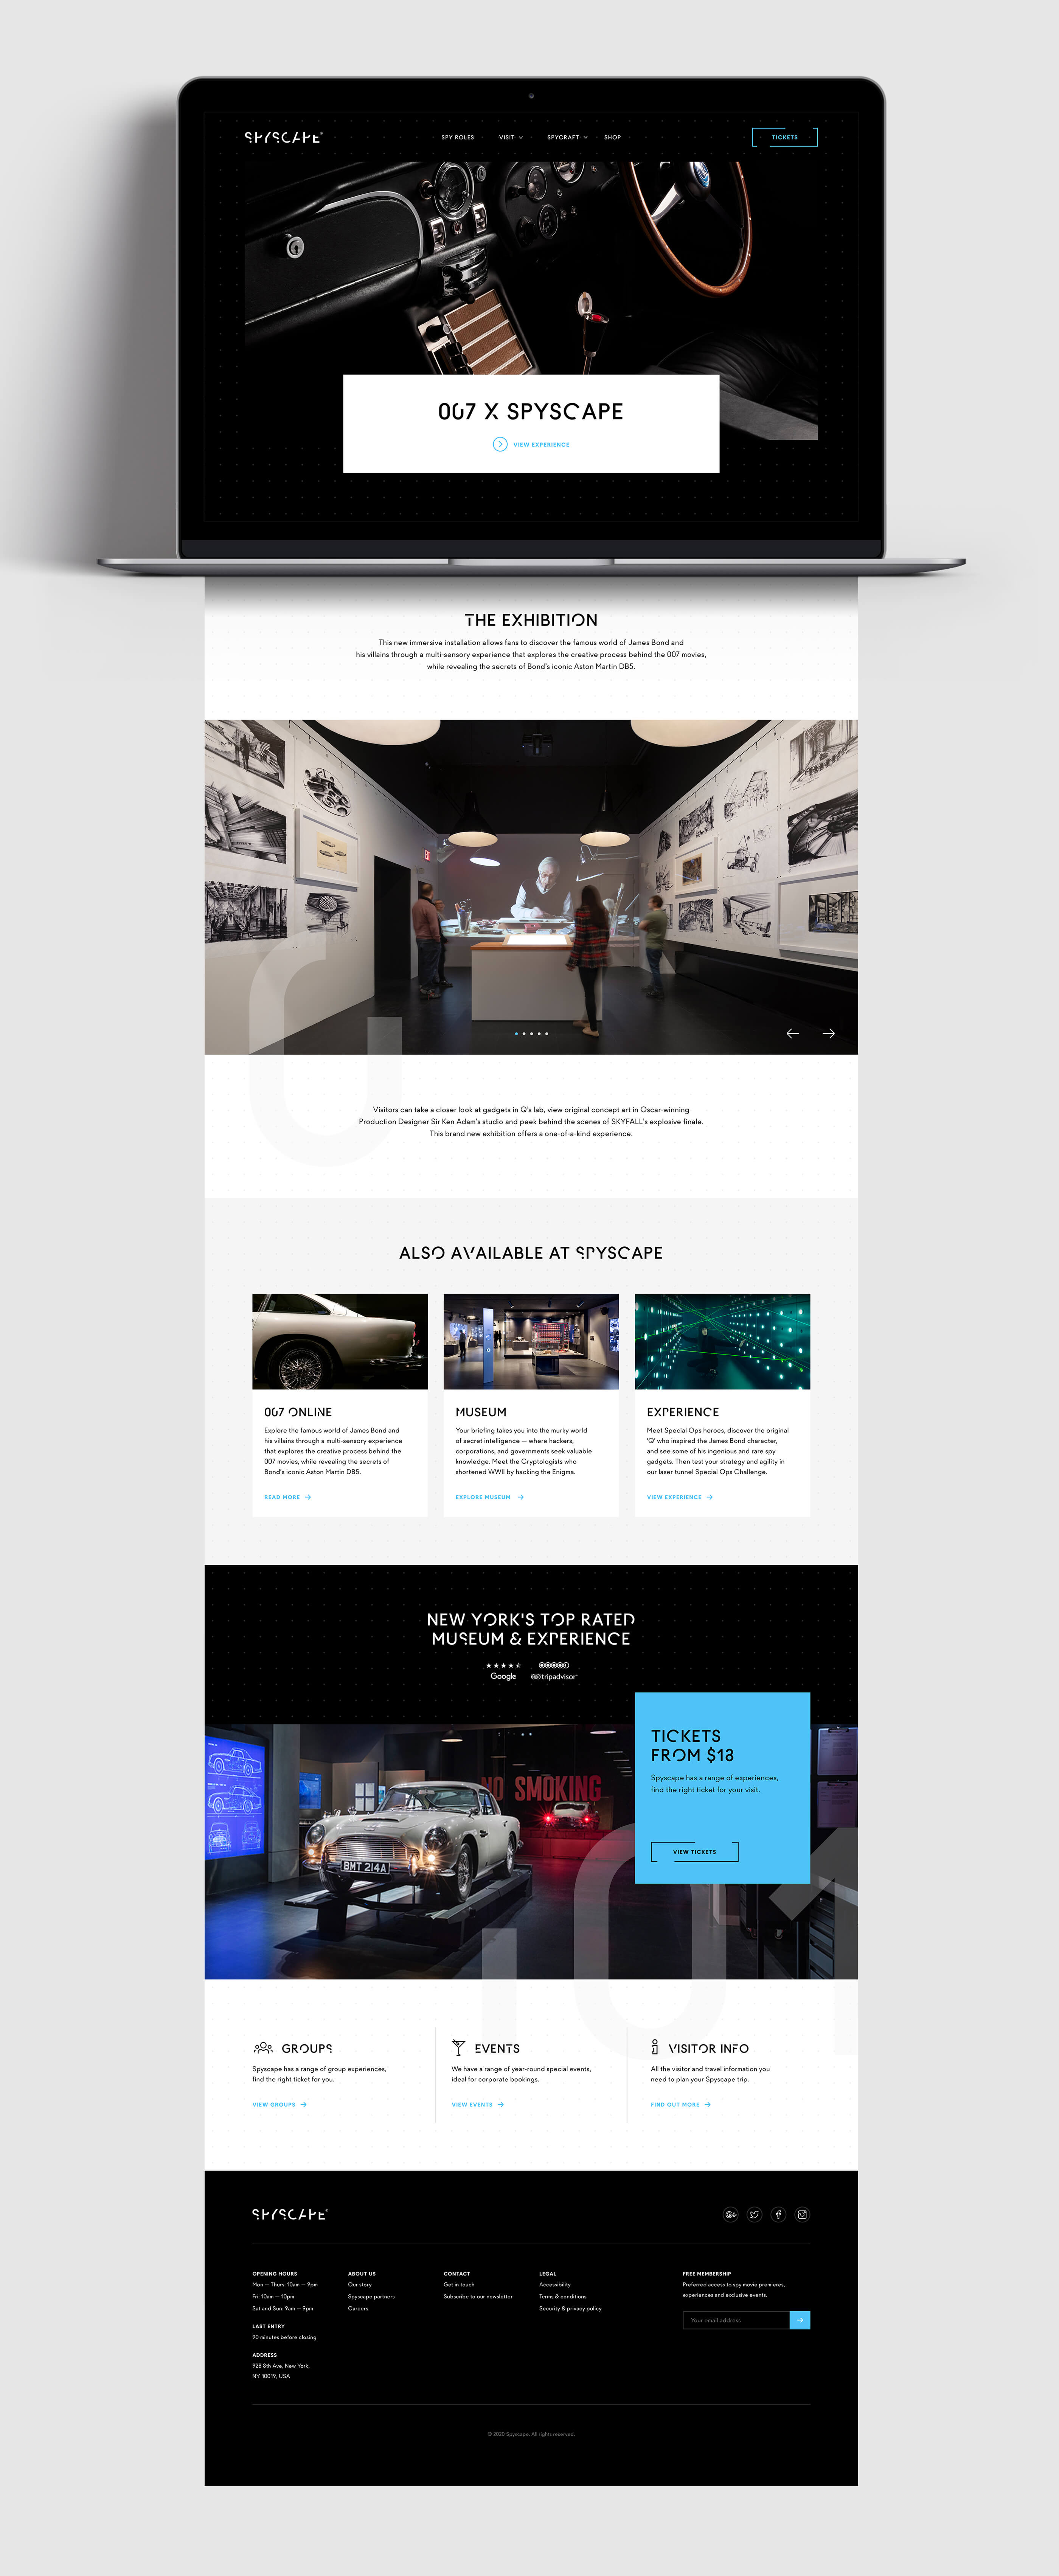 Final render of the 007 James Bond Spyscape page, showcasing a full width image carousel, overview of the 007 experience and featured alternative exhibitions